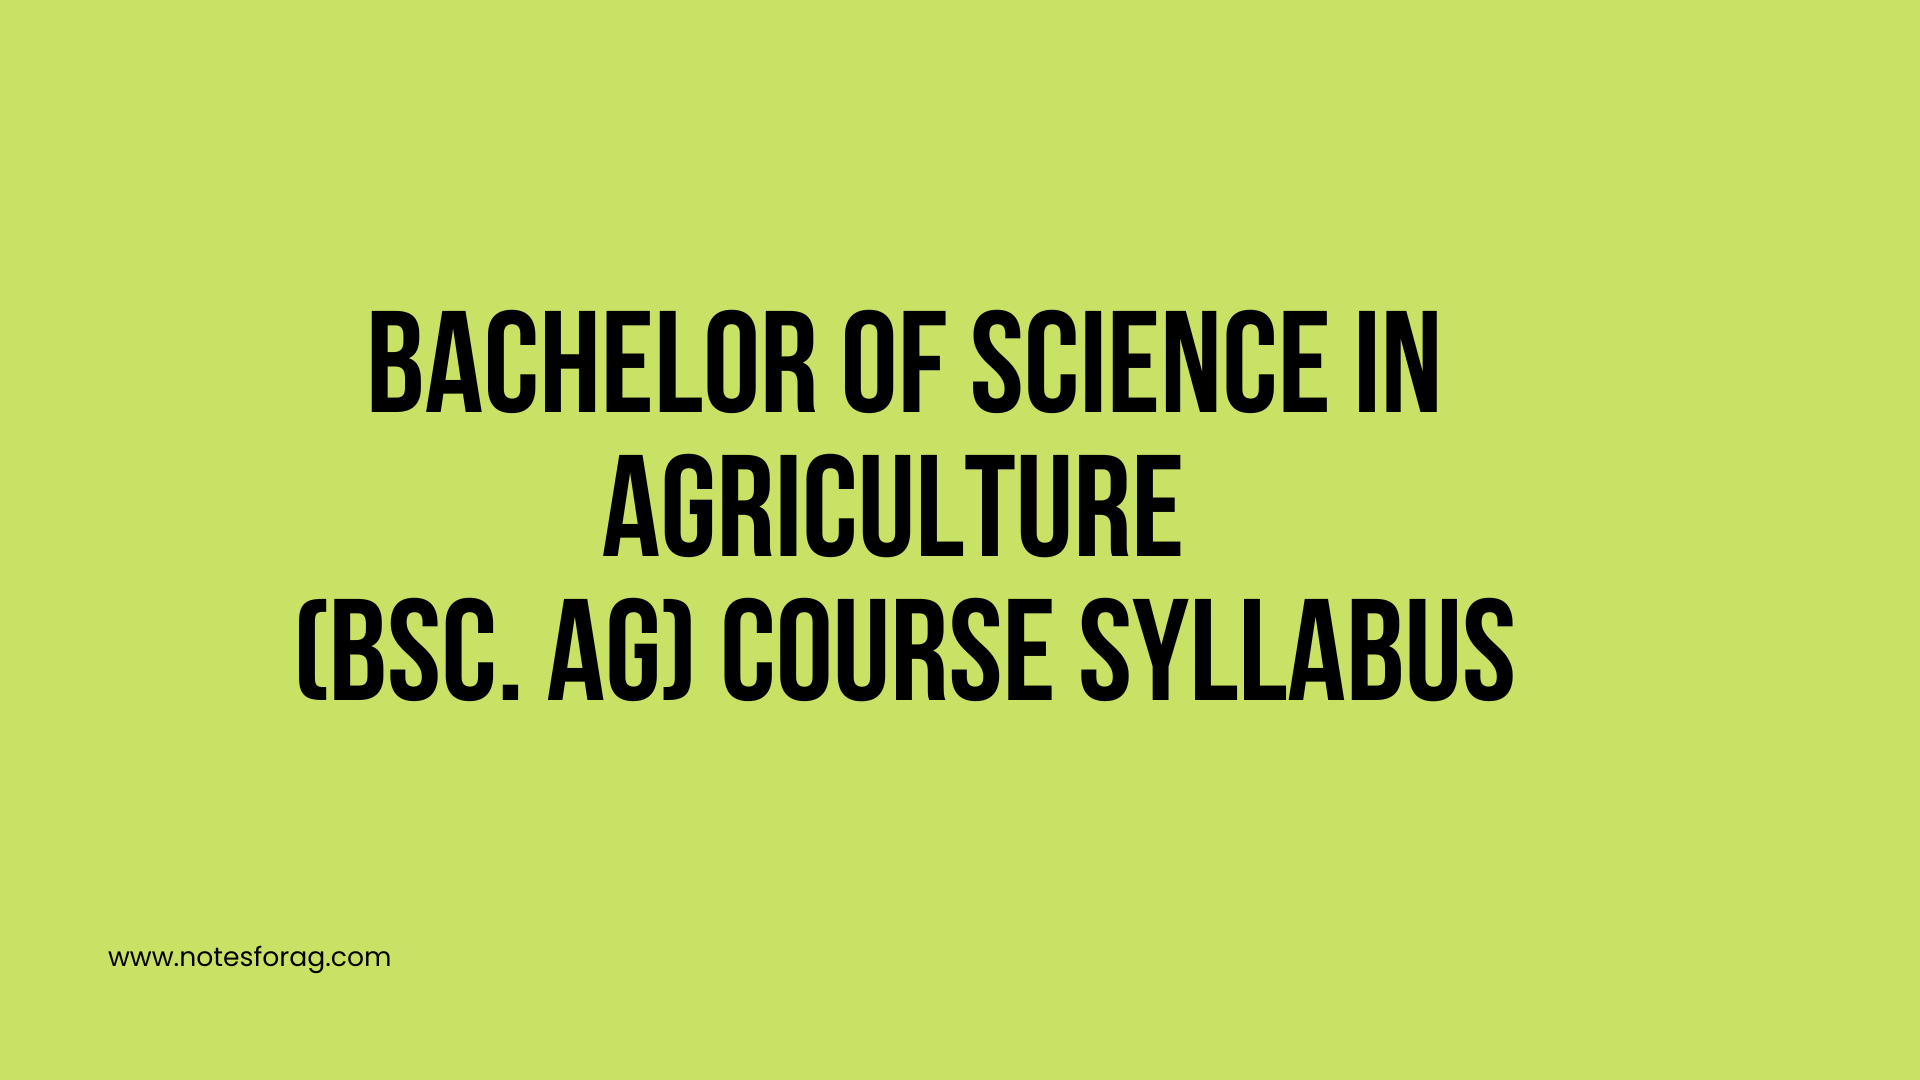 Bachelor of Science in Agriculture (BSc. AG) Course Content